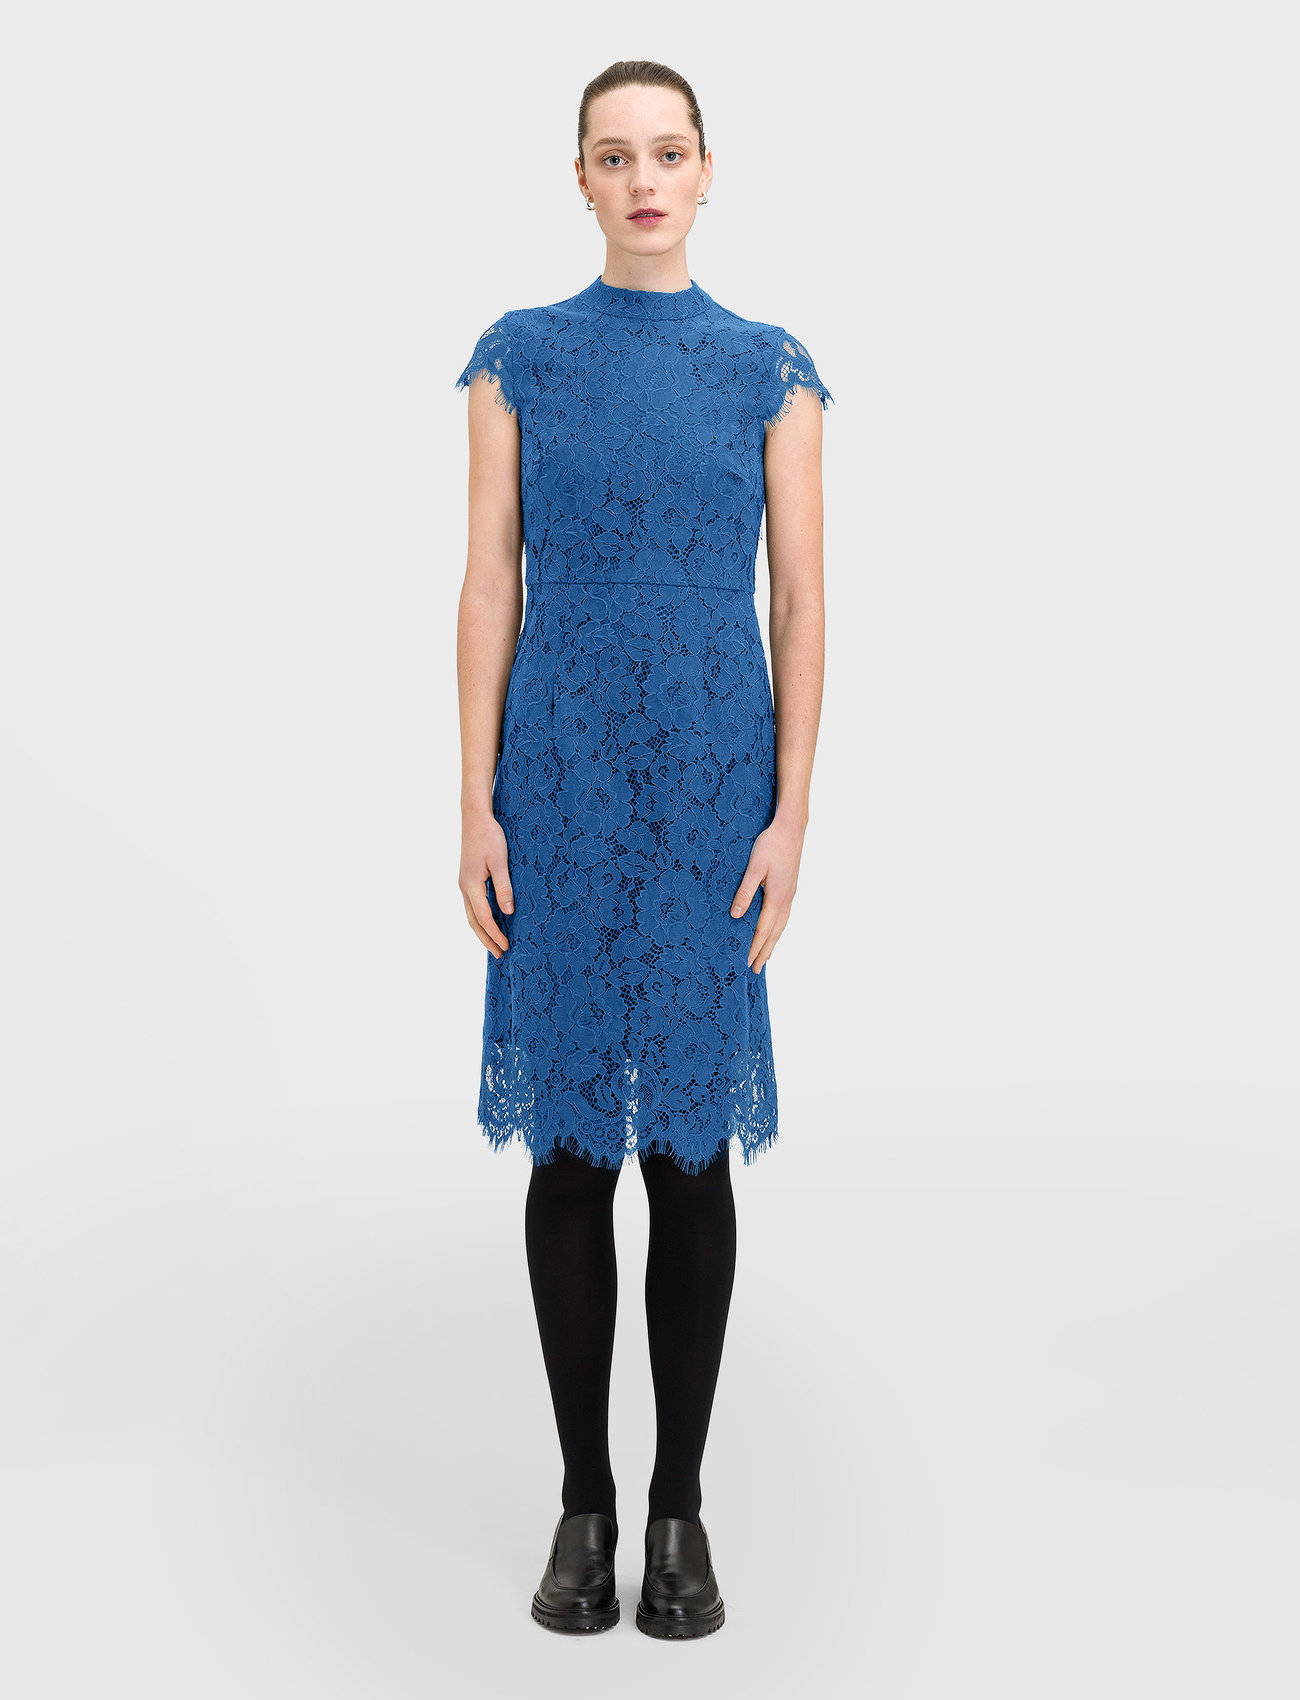 Stand-up Collar Lace Dress